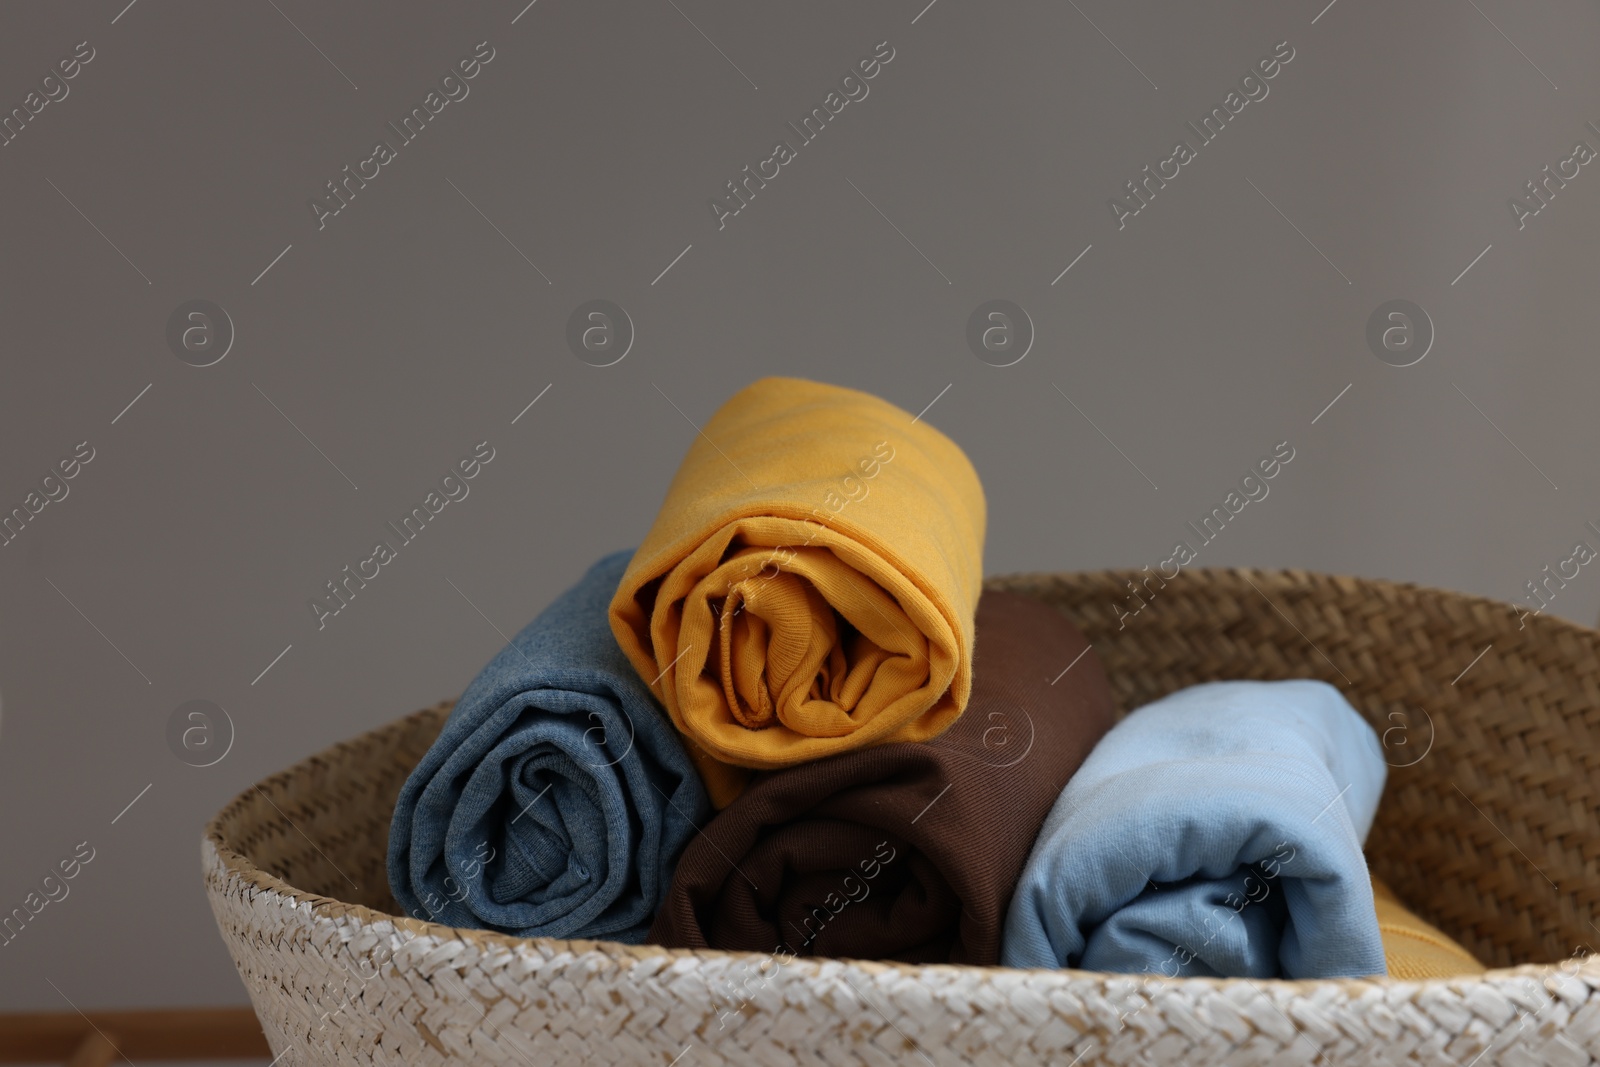 Photo of Different rolled shirts in basket against grey background. Organizing clothes